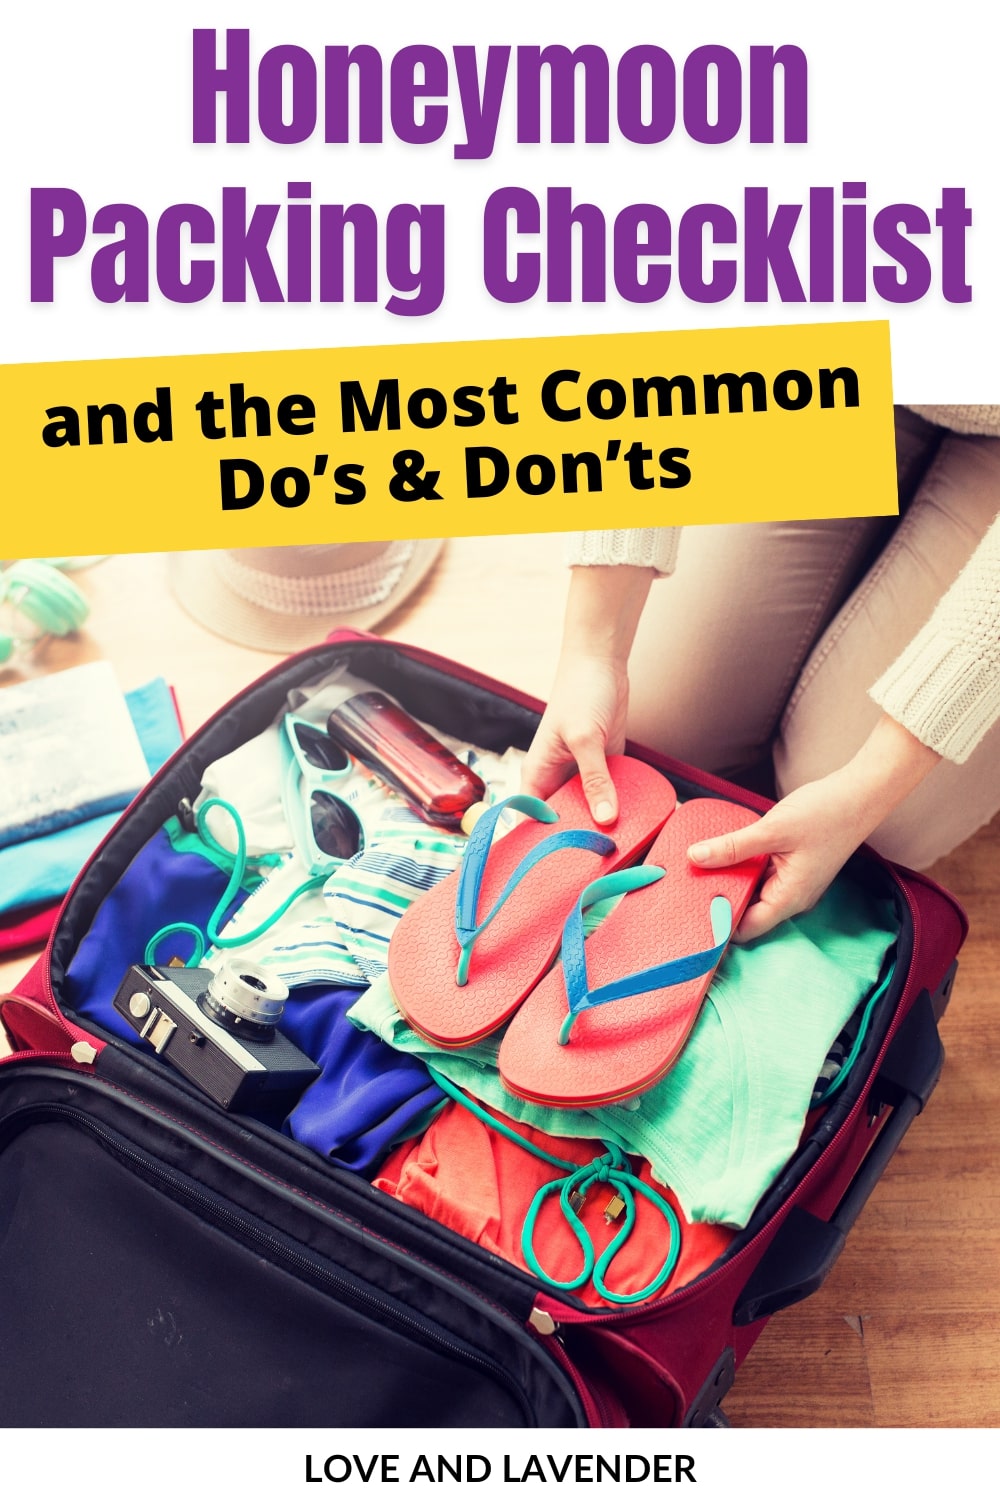 2022 Honeymoon Packing List: Tips for all Trip Types